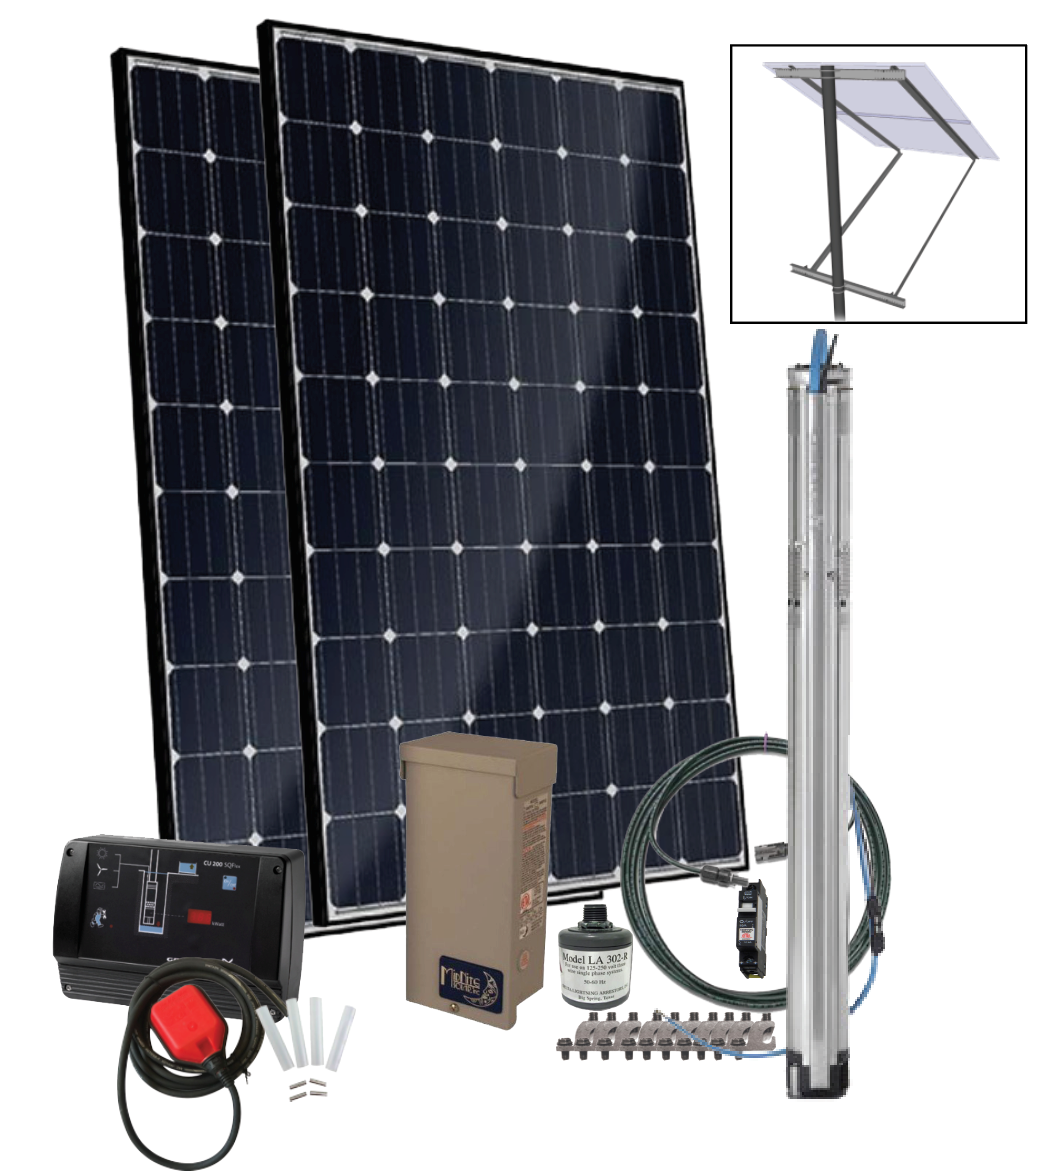 grundfos solar water pumping kit designed by the solar store that includes solar panels, mounts, pumps and accessories